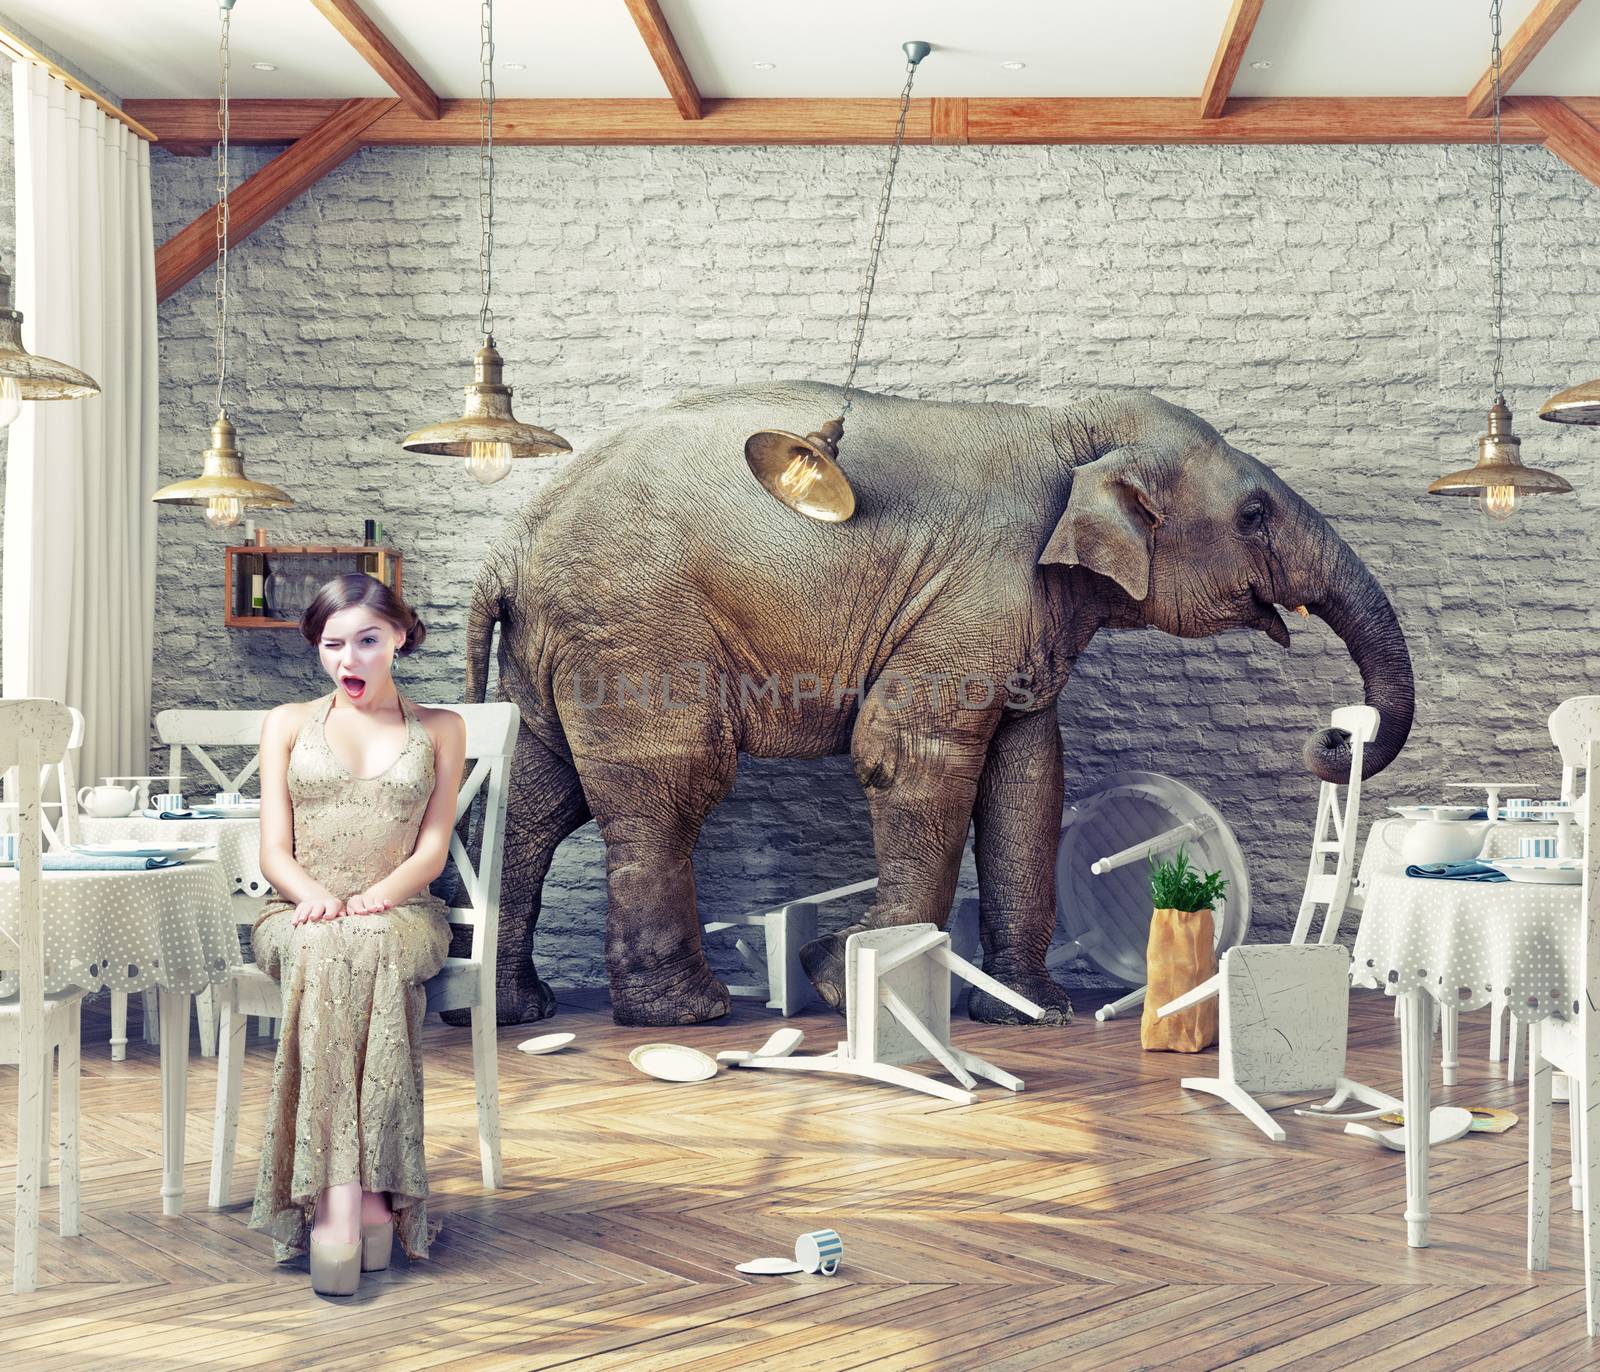  elephant calm in a restaurant by vicnt